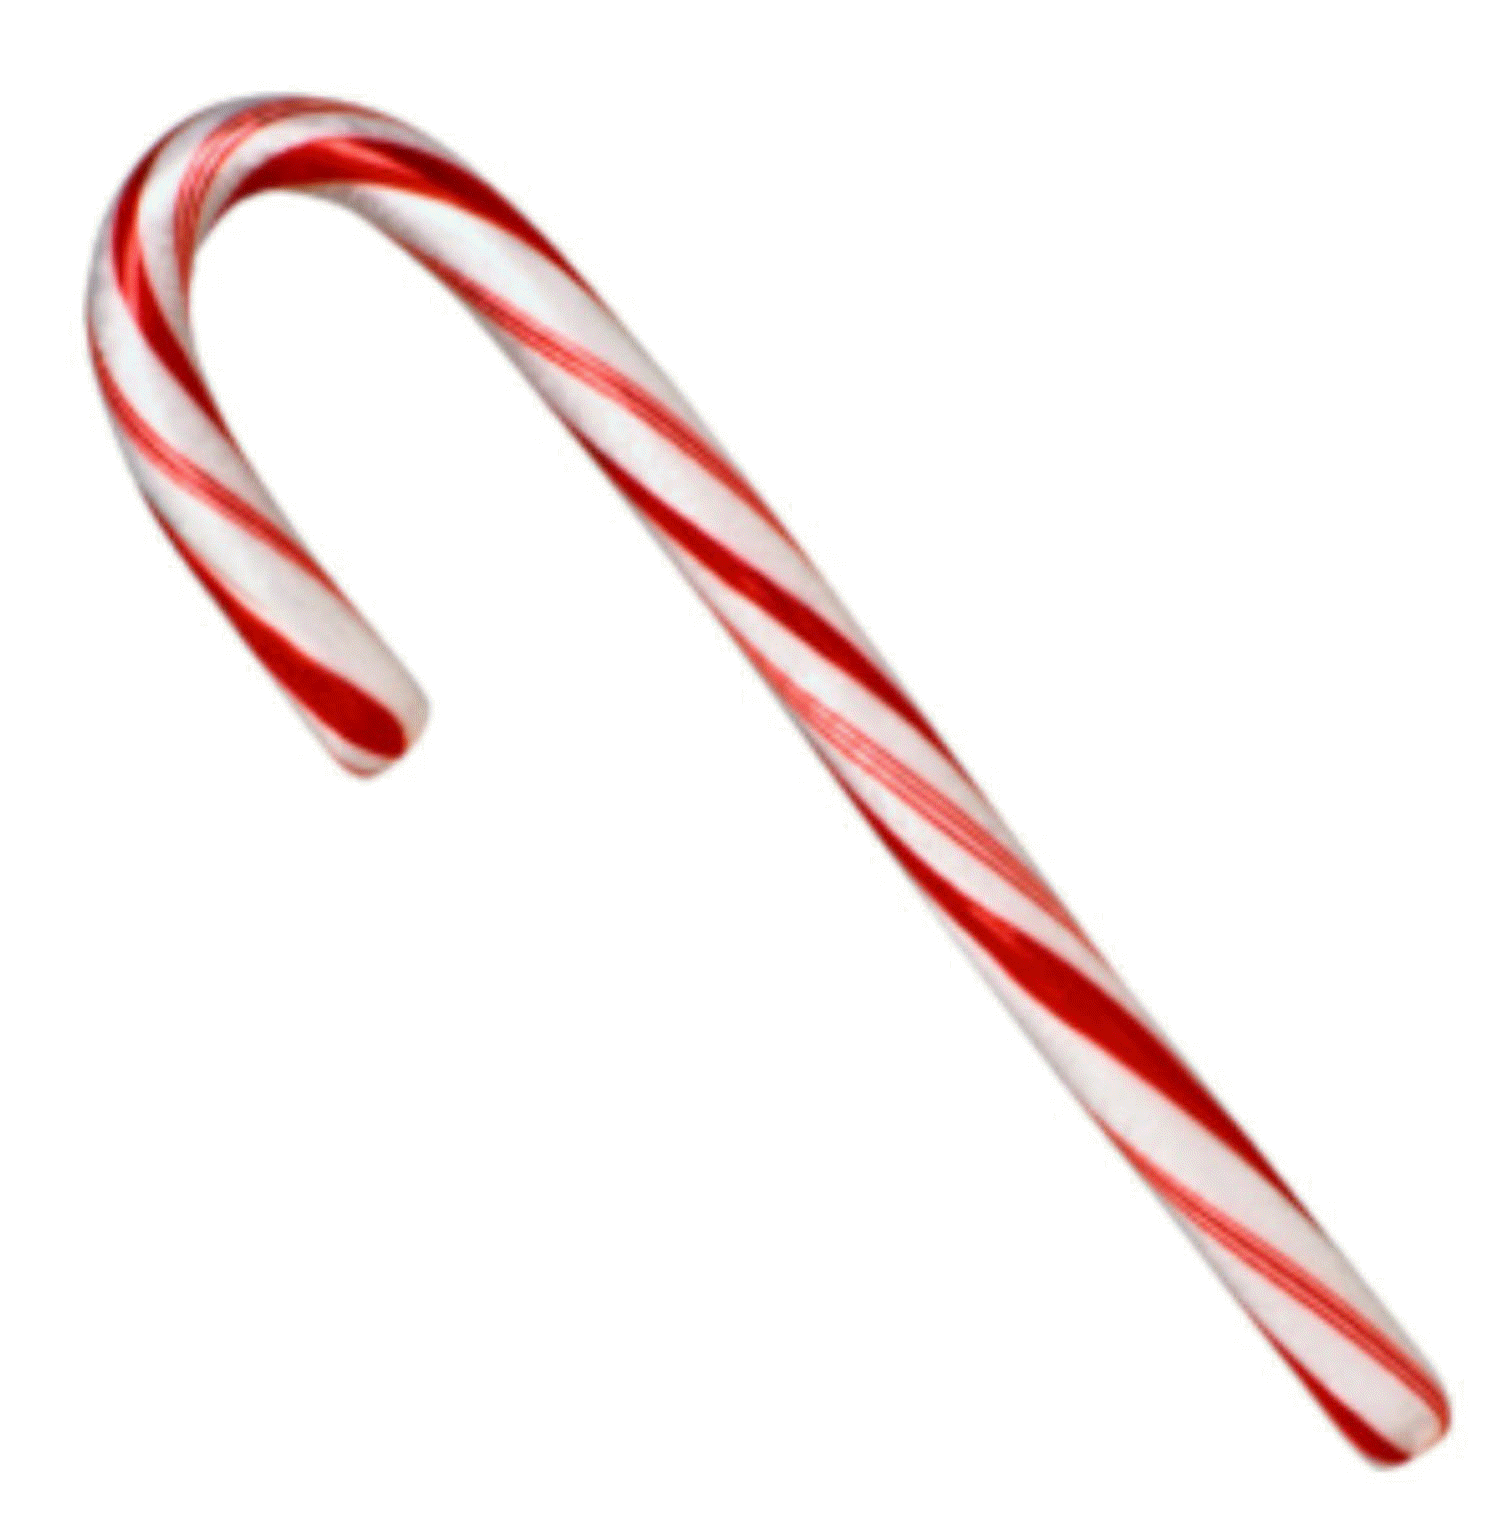 31 Picture Of Candy Cane Free Cliparts That You Can Download To You